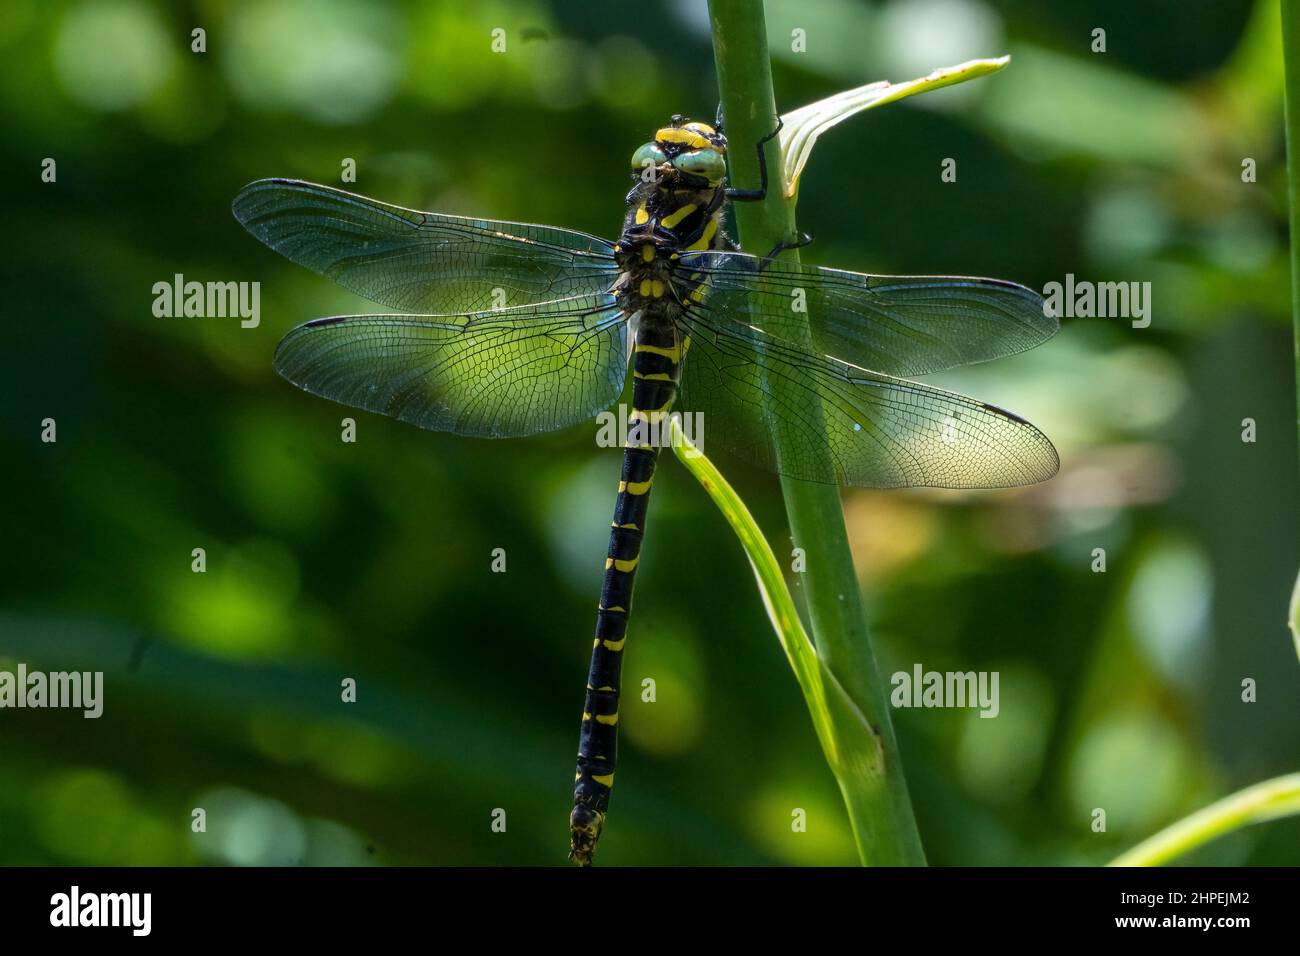 Closeup shot of a golden-ringed dragonfly Stock Photo